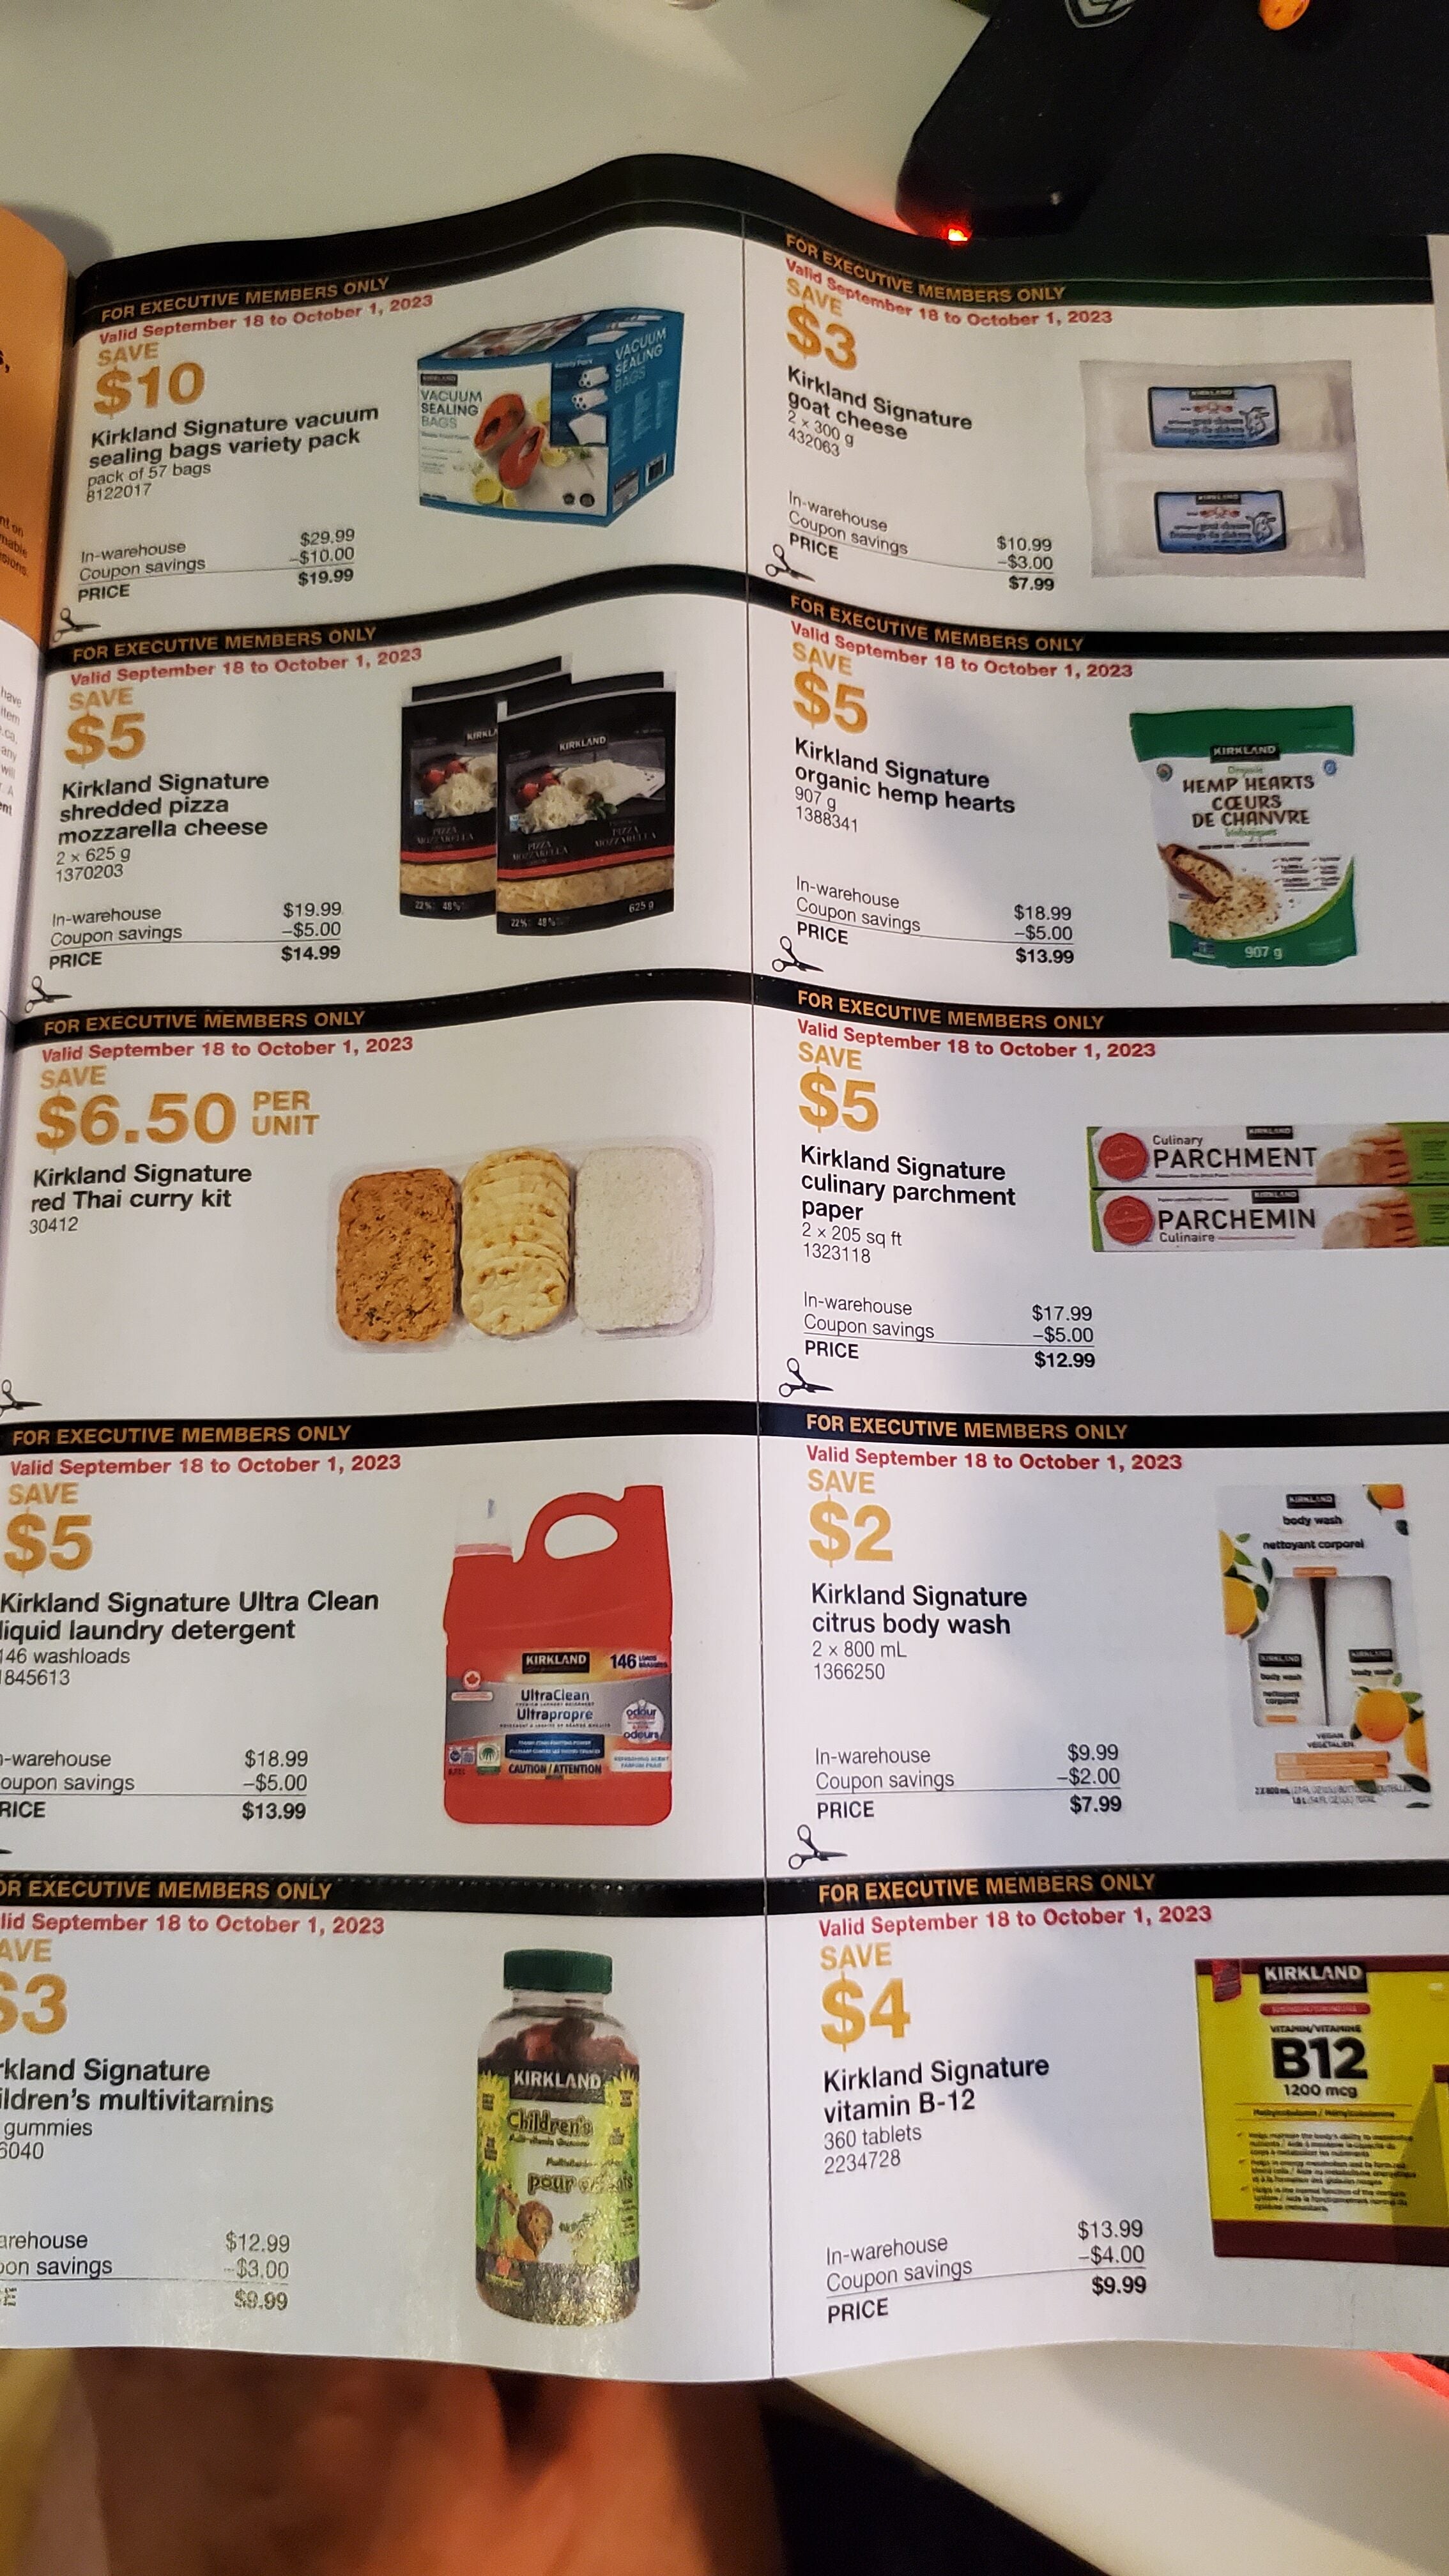 Costco Canada September/October Fall Sales Flyer Preview! - Costco East Fan  Blog